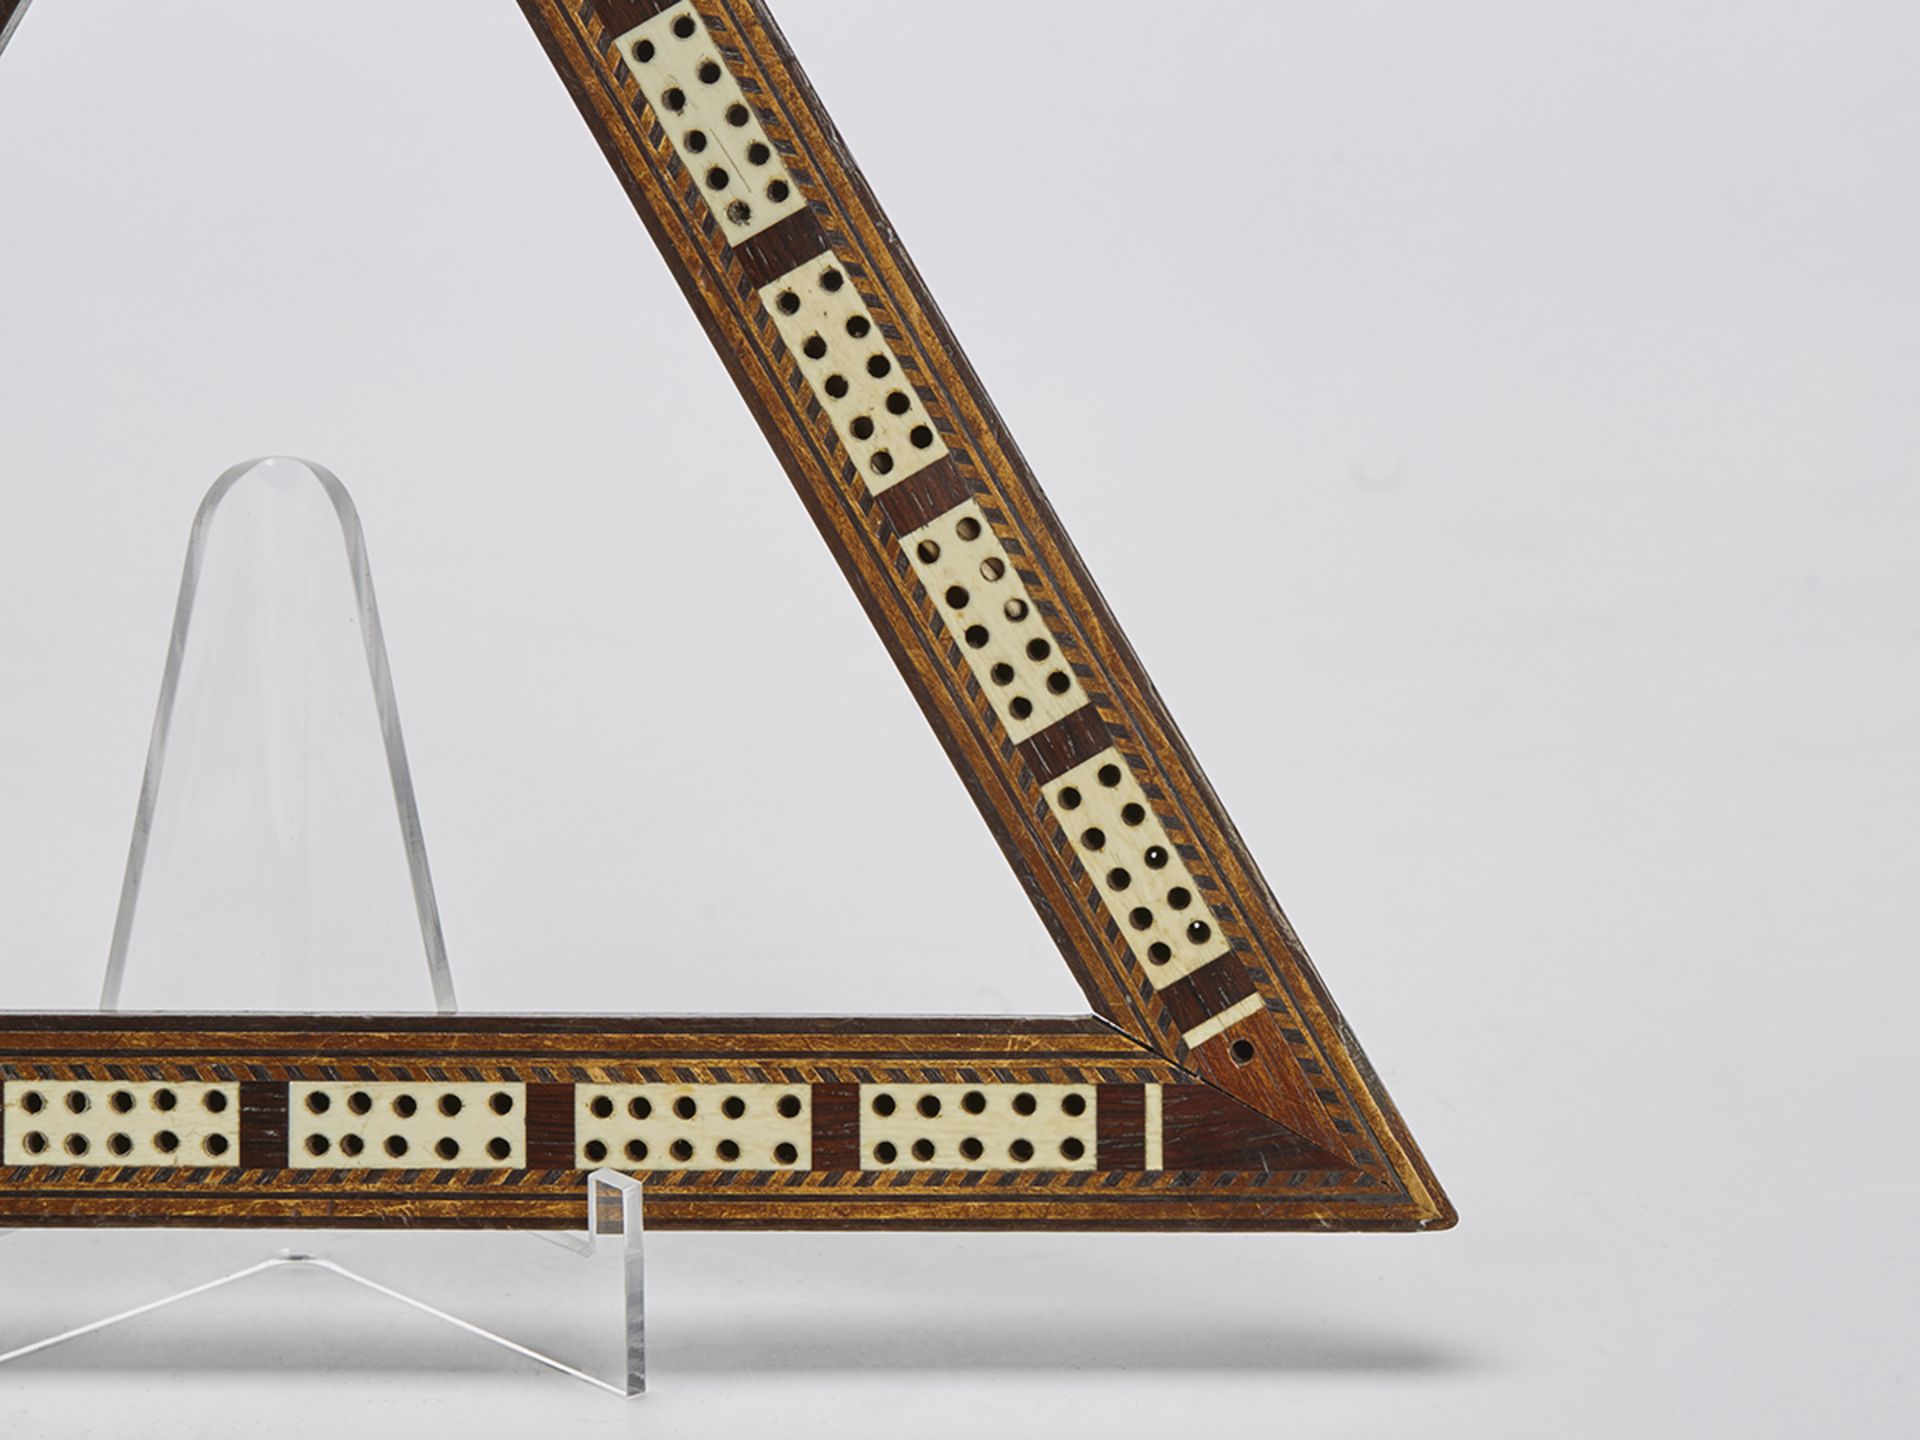 ANTIQUE INLAID TRIANGULAR WOODEN CRIBBAGE BOARD 19TH C. - Image 4 of 5